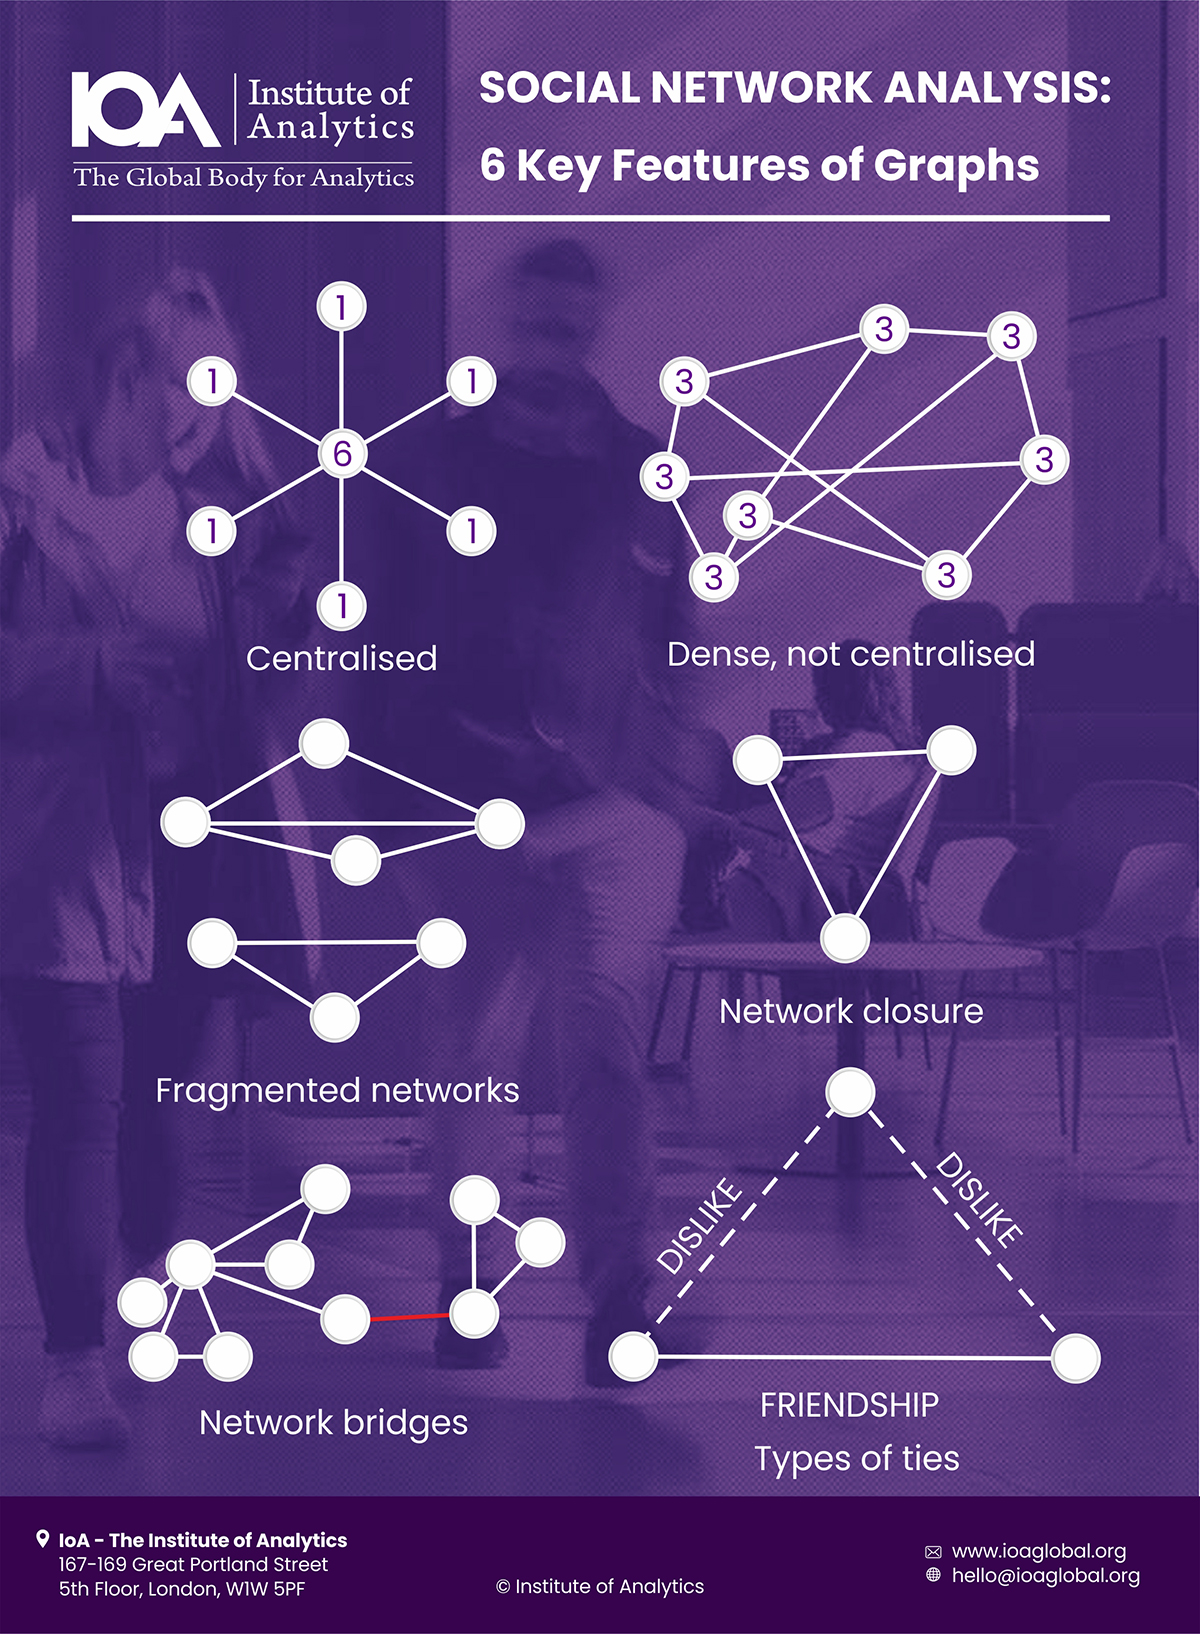 SOCIAL NETWORK ANALYSIS: 6 Key Features of Graphs